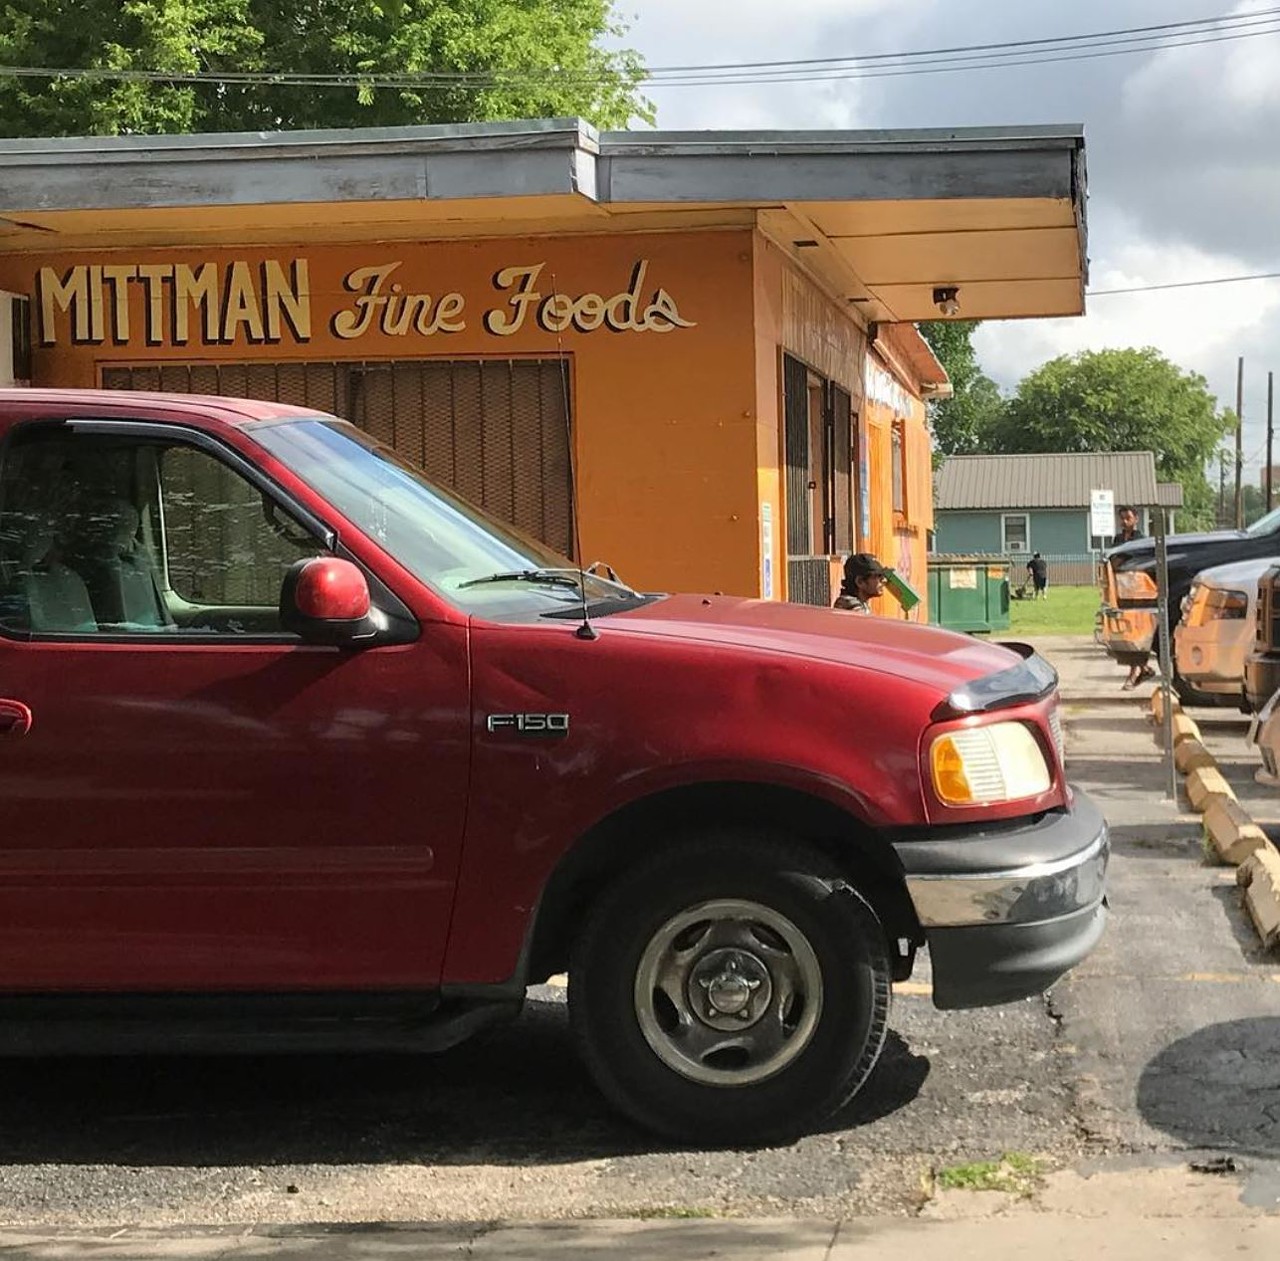 Mittman Fine Foods
1125 S Mittman St, (210) 532-3318, facebook.com/pages/Mittman-Fine-Foods
This awesome mom and pop shop has been serving up authentic Mexican food to San Antonians no matter how busy they get.
Photo via Instagram / _jluda_